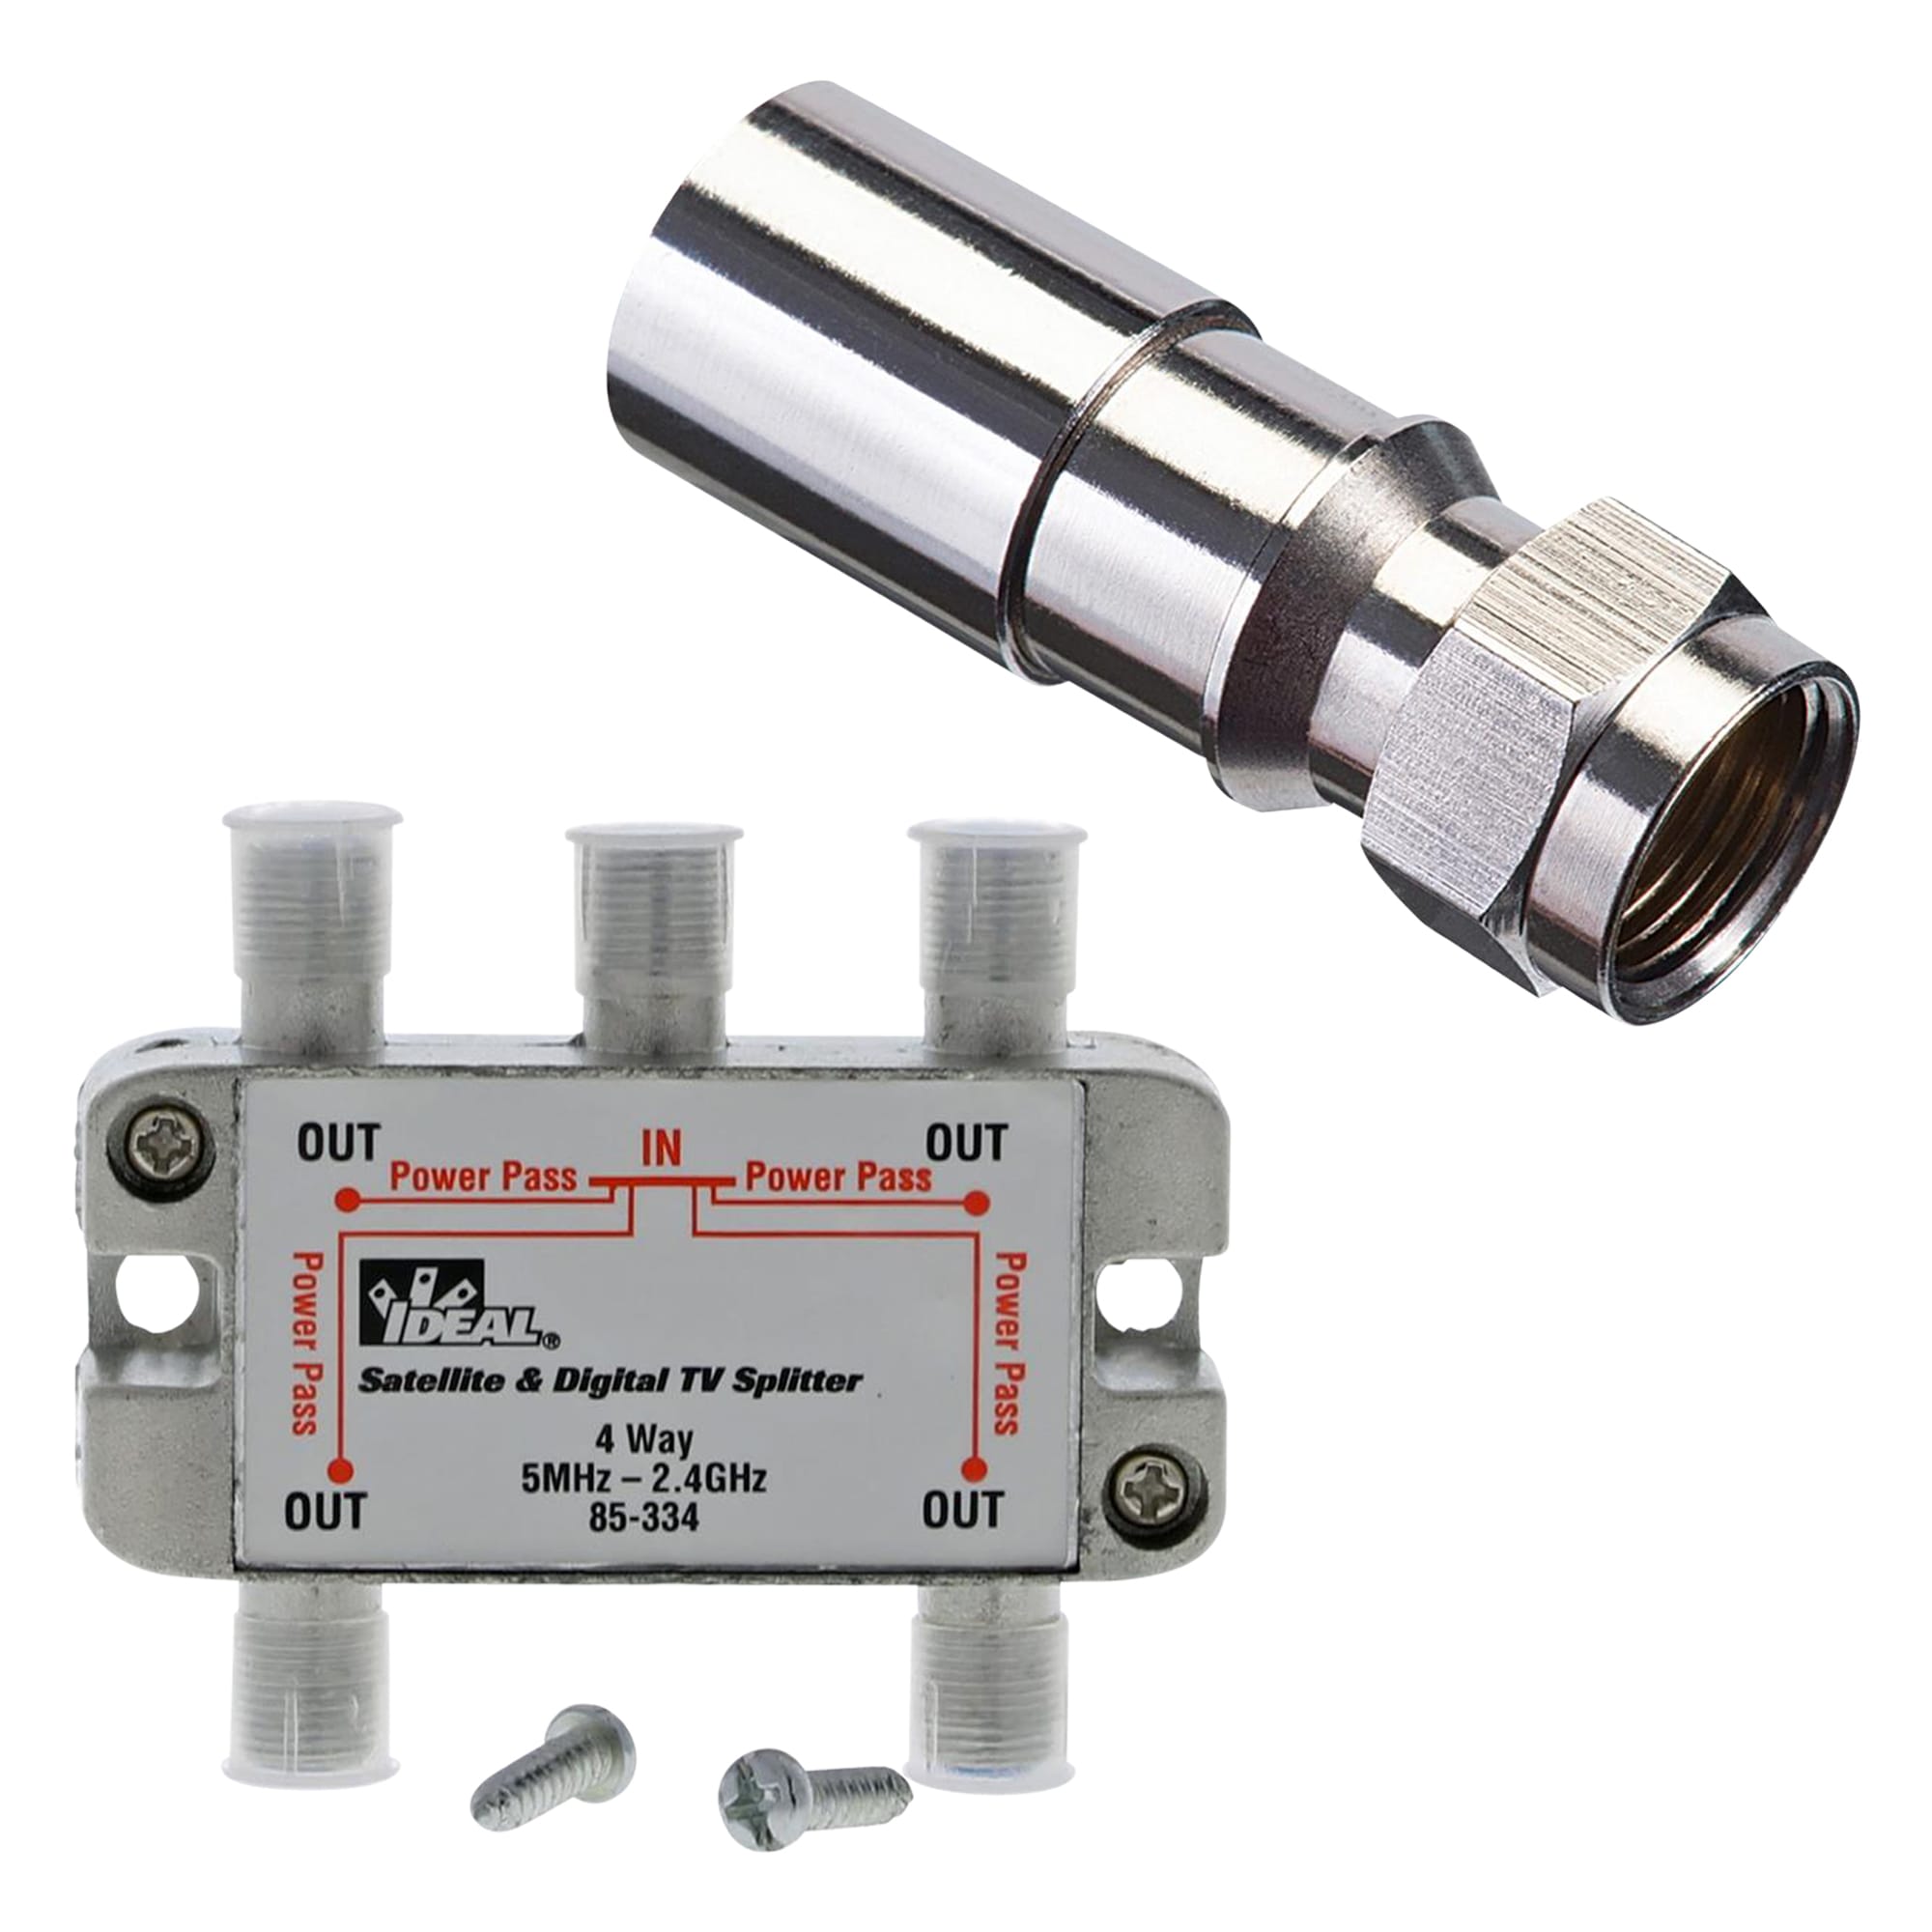 Afkeer Vaardig Socialistisch Shop IDEAL RG-6, RG-6Q 1-in Compression F-Connector with Zinc 4-Way Coax  Video Cable Splitter at Lowes.com